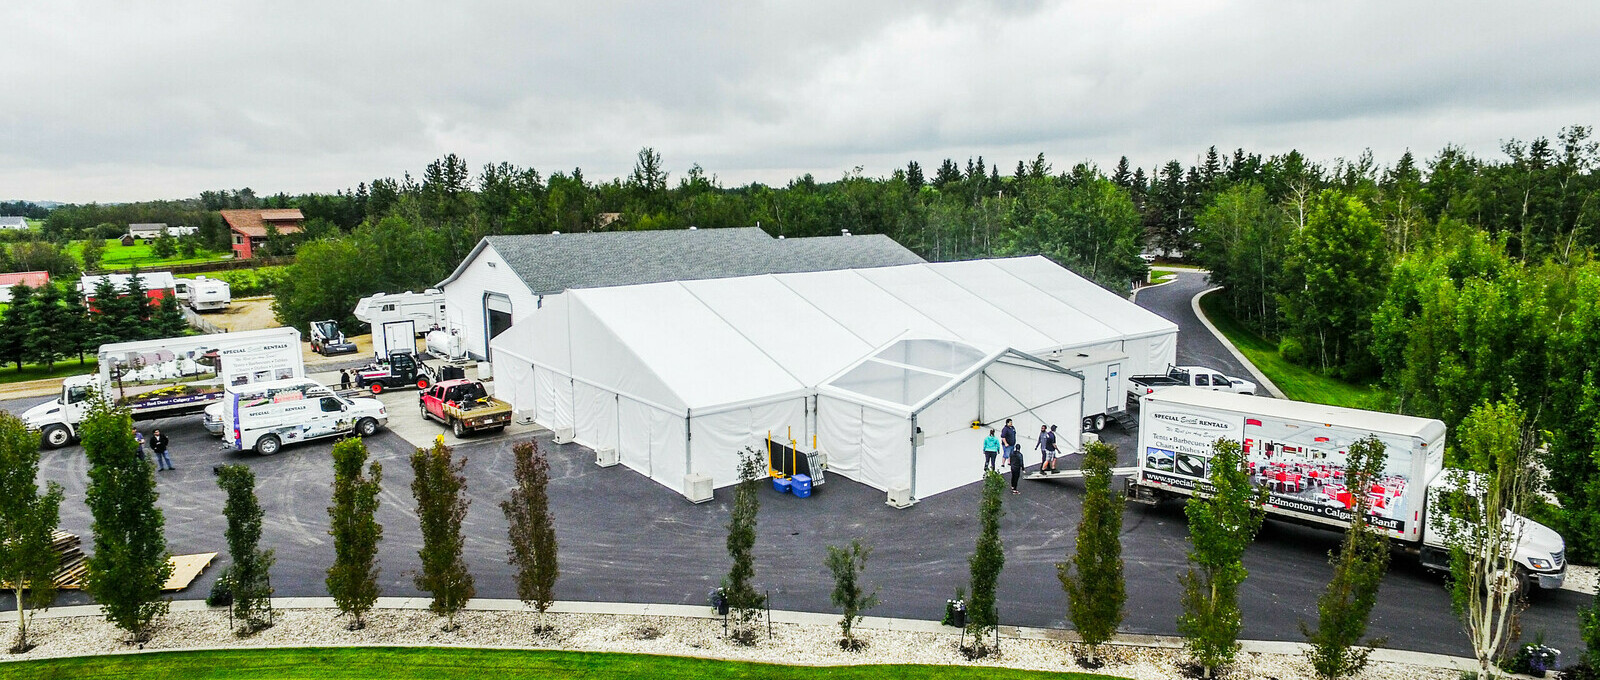 Special Event Rentals - Edmonton sets up outdoor tent wedding in Leduc County